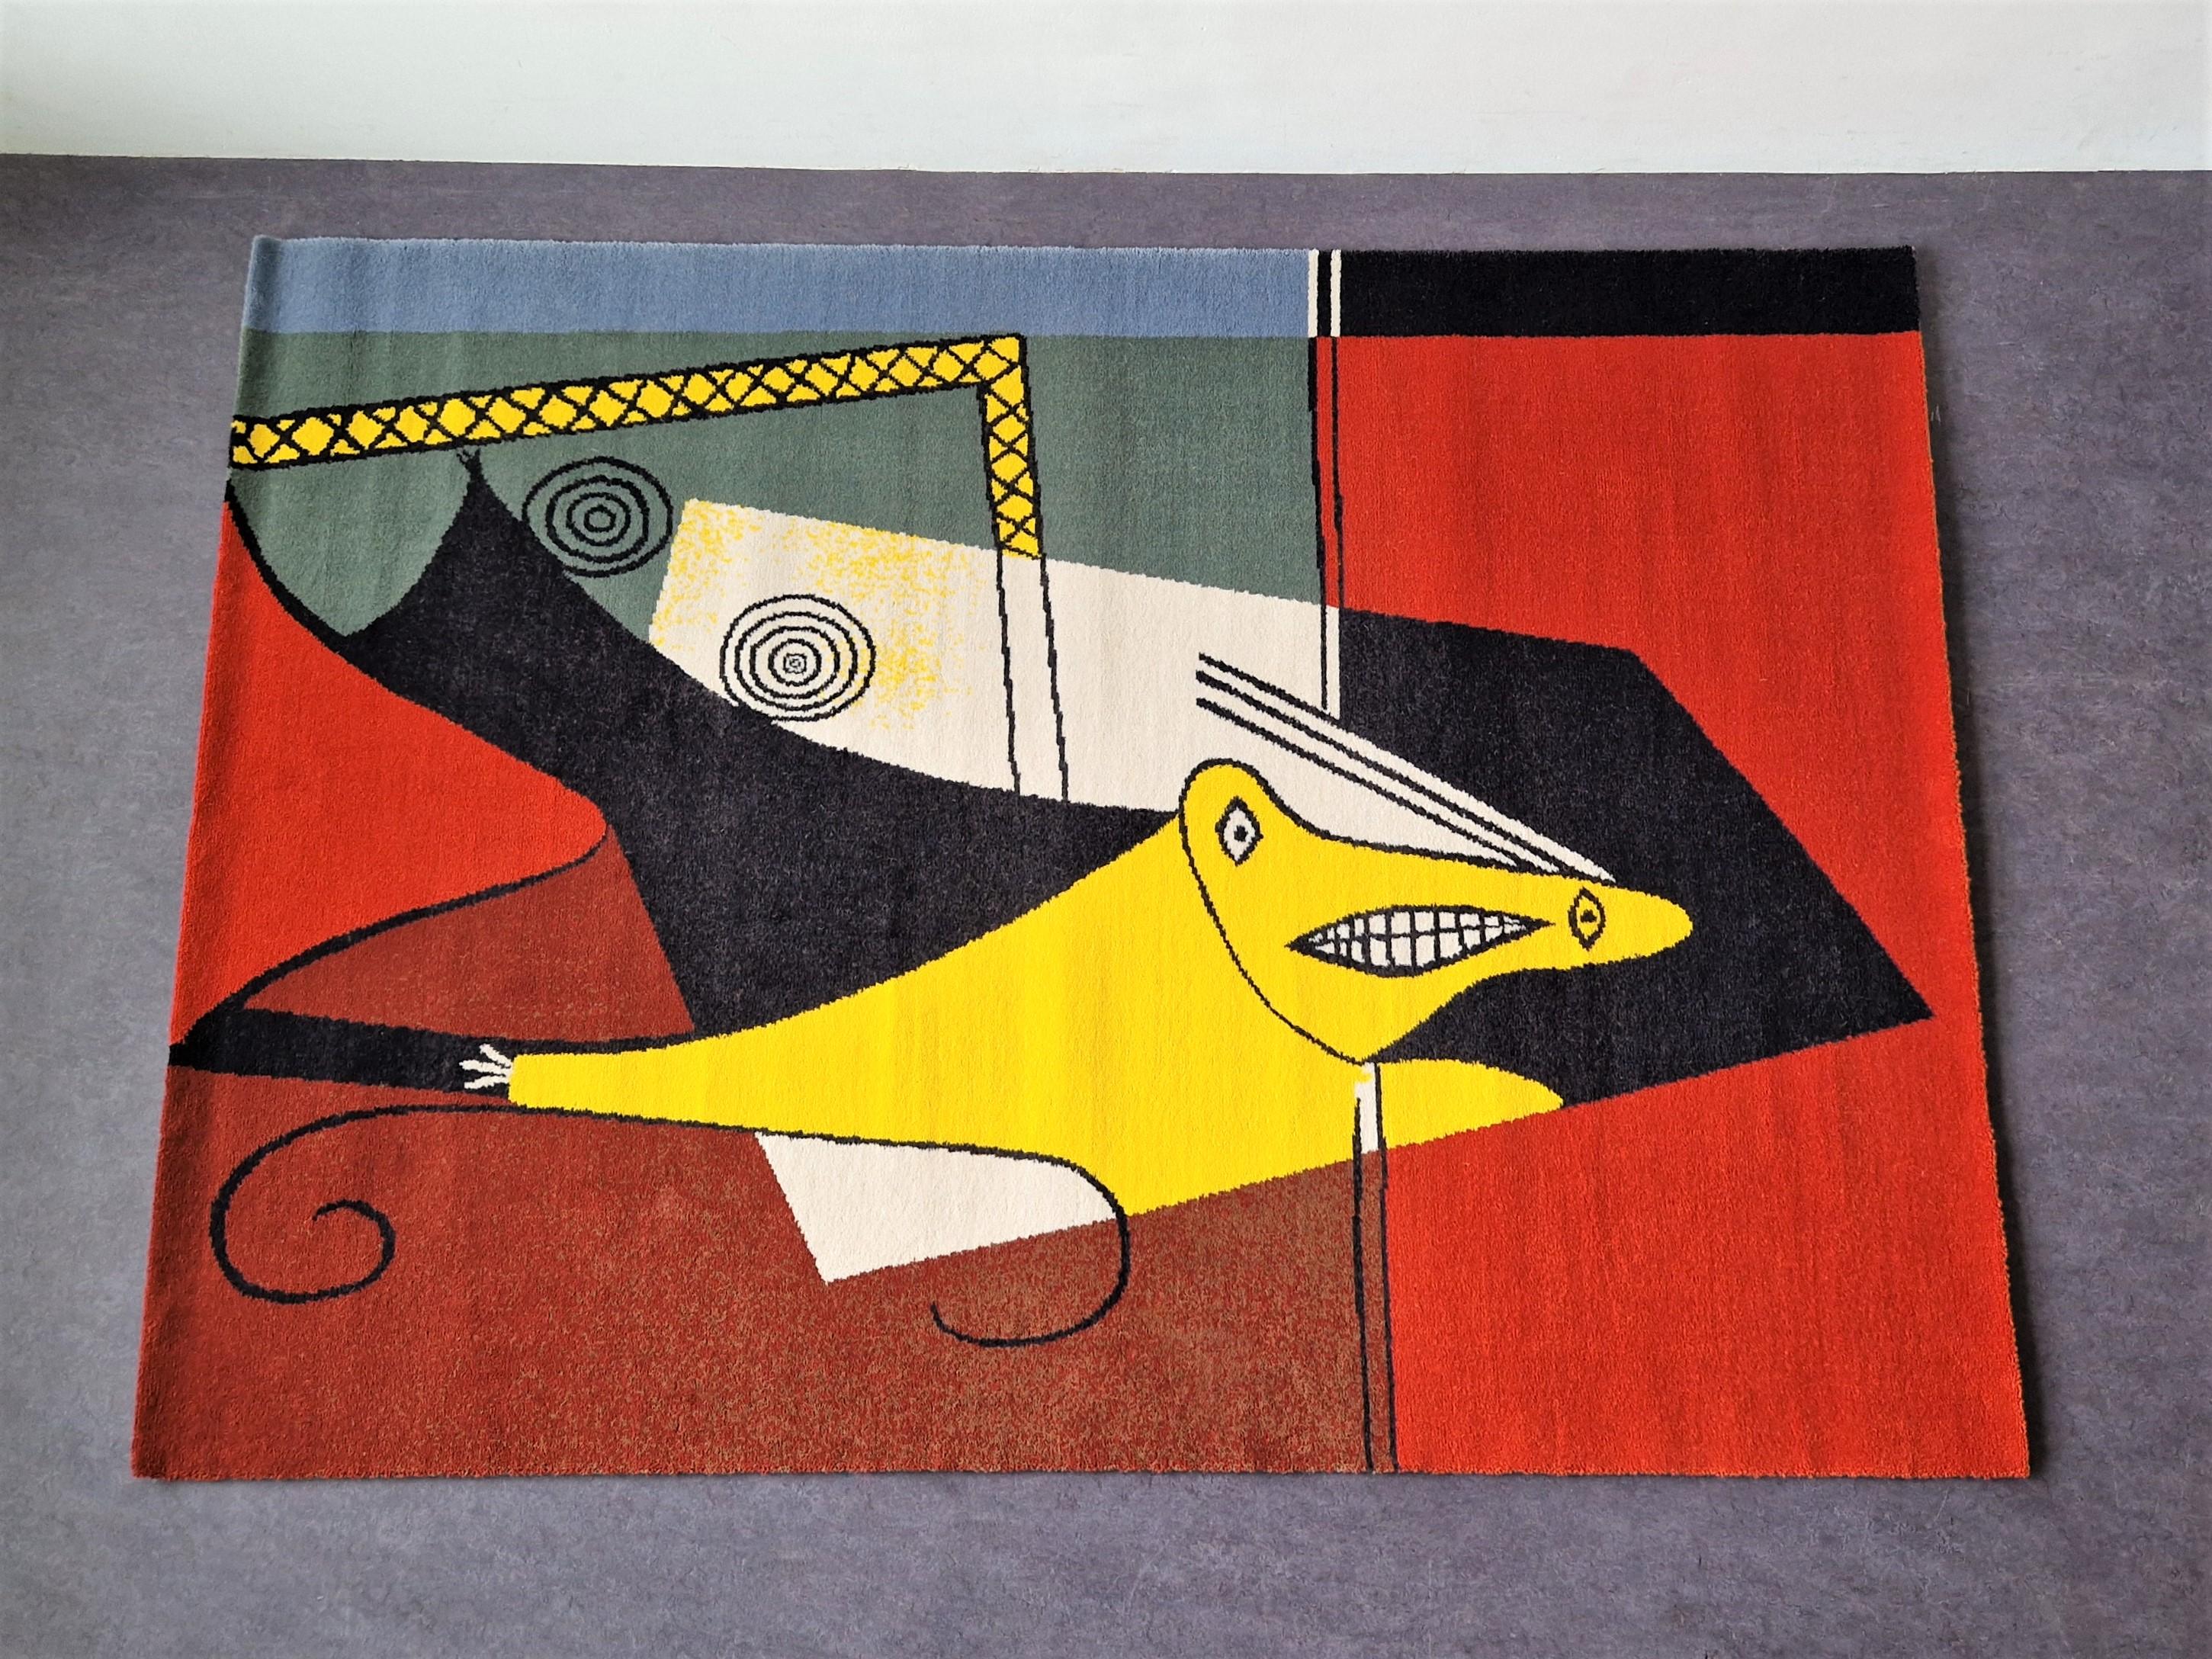 This beautiful pure New Zealand wool carpet is based on the original painting “La Figura” of 1927 by Pablo Picasso. It was made by Desso, a prominent manufacturer of fine carpets, as part of the 'Art Collection' in the Netherlands in 1995. The